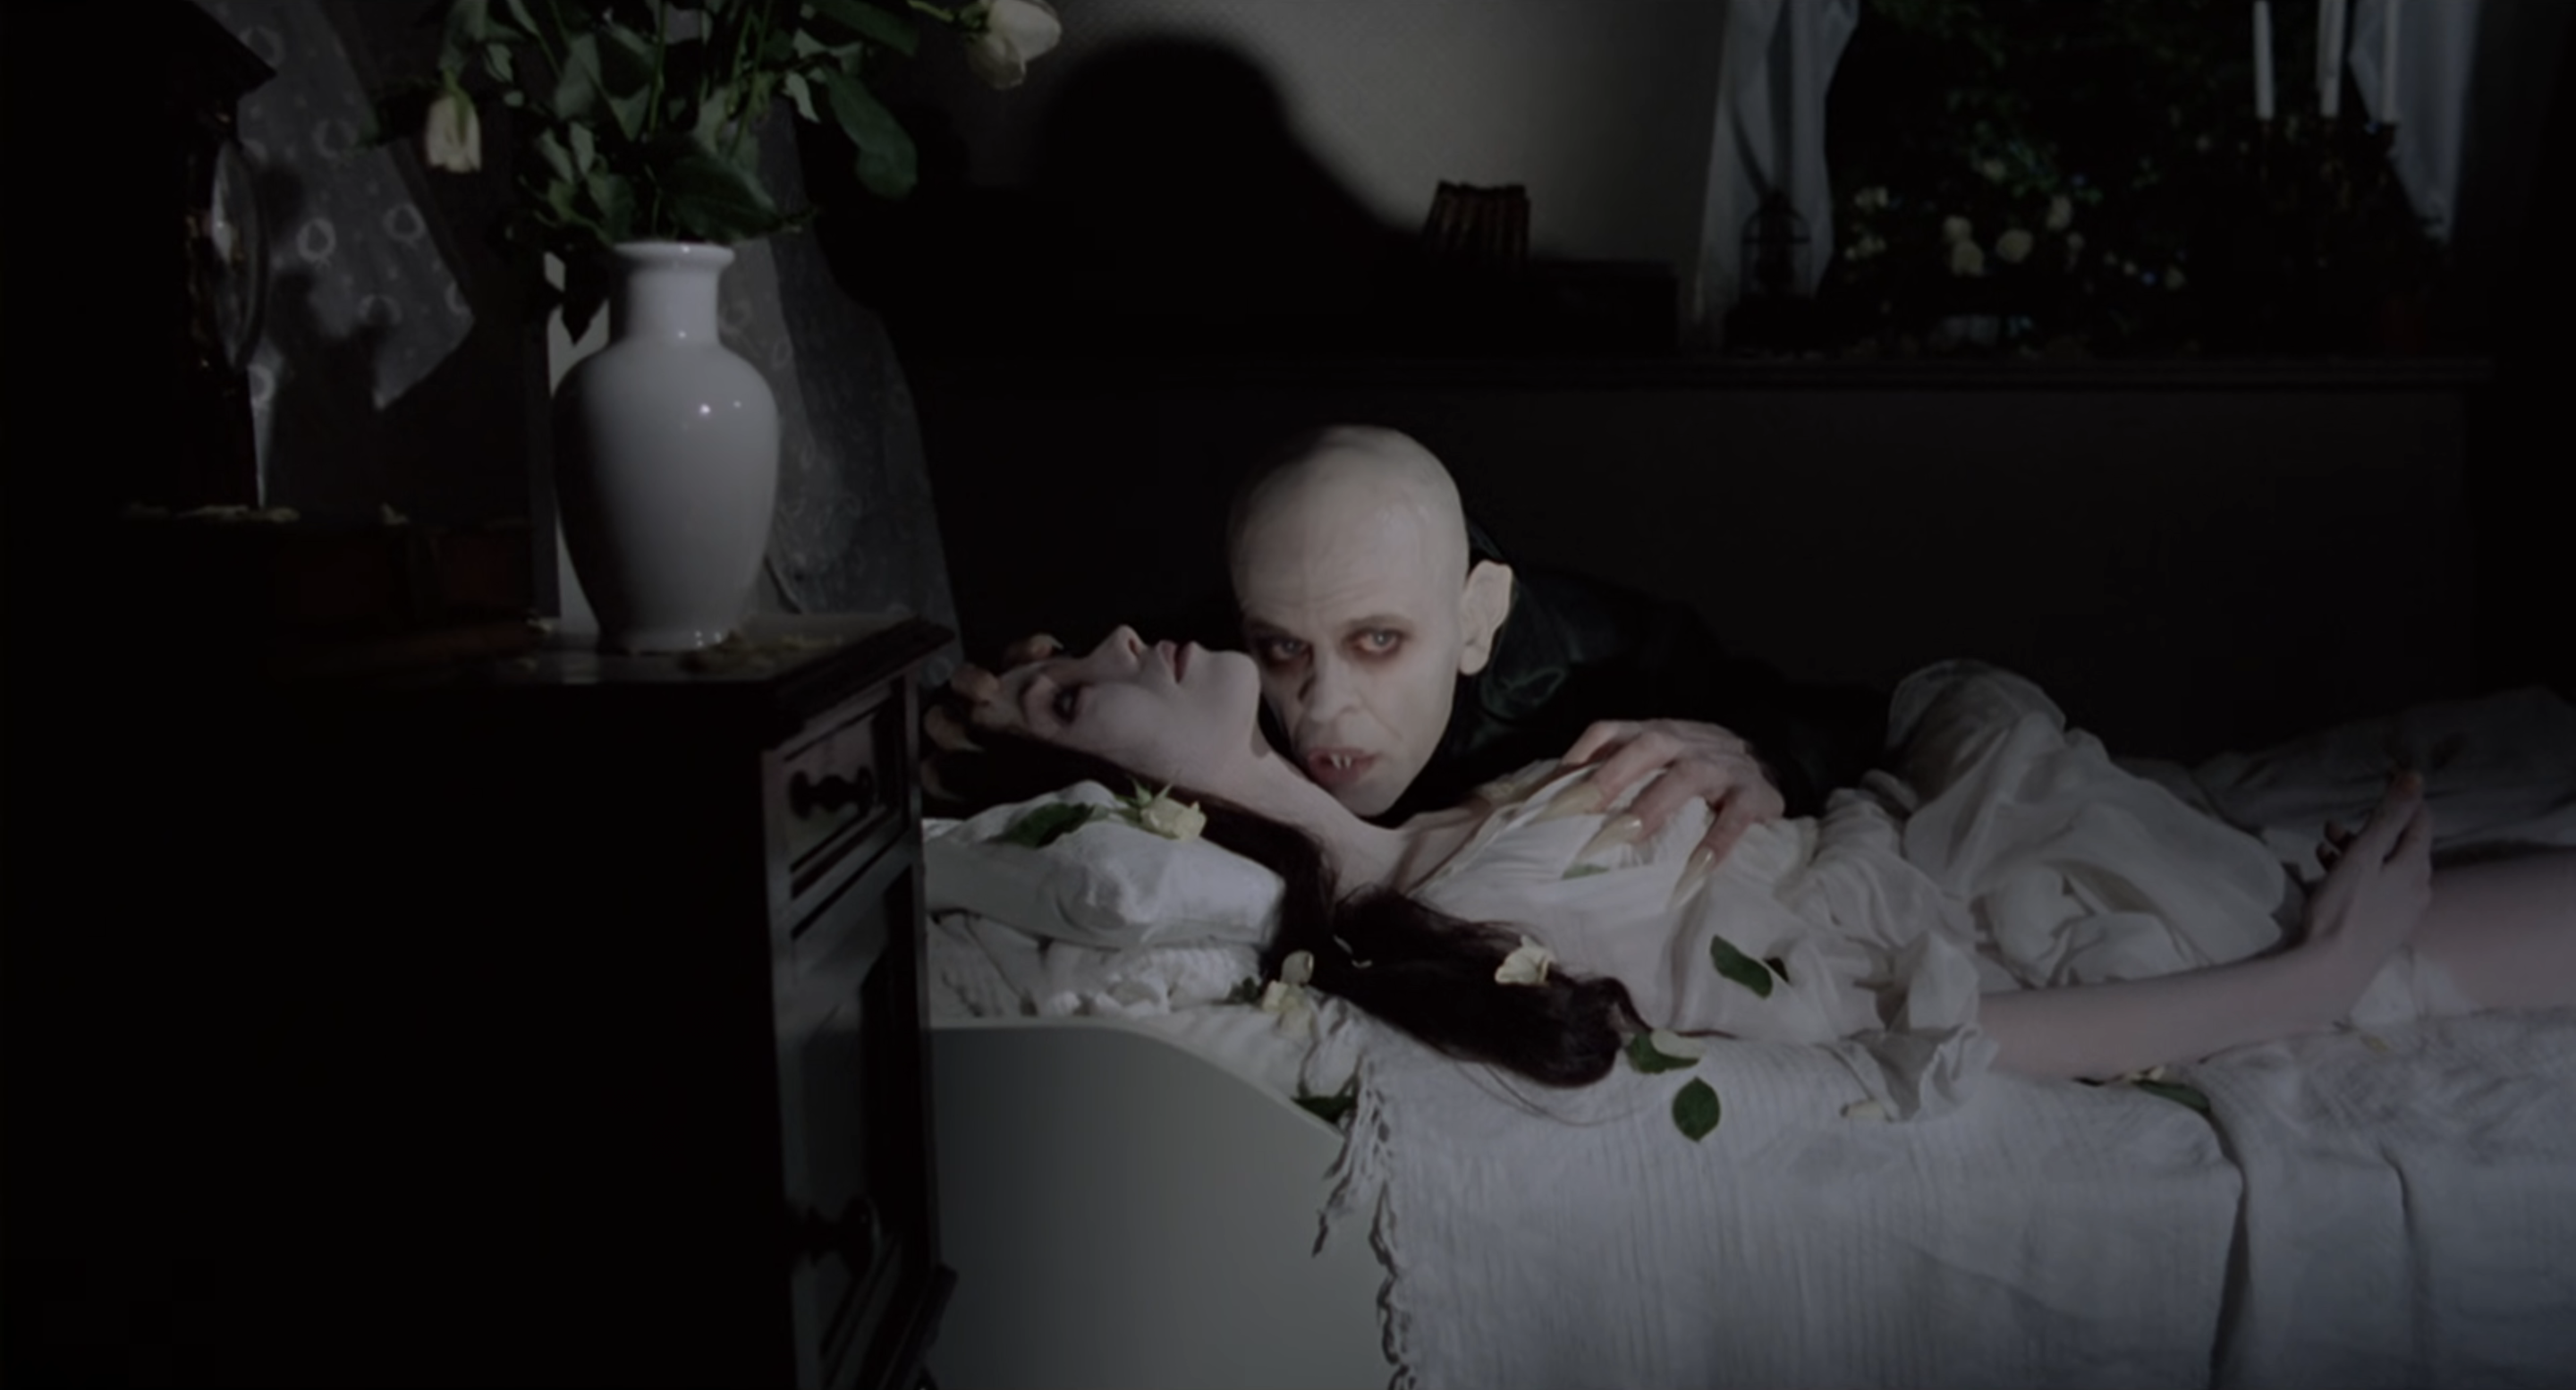 Nosferatu about to drink from the neck of Lucy, a woman lying in bed